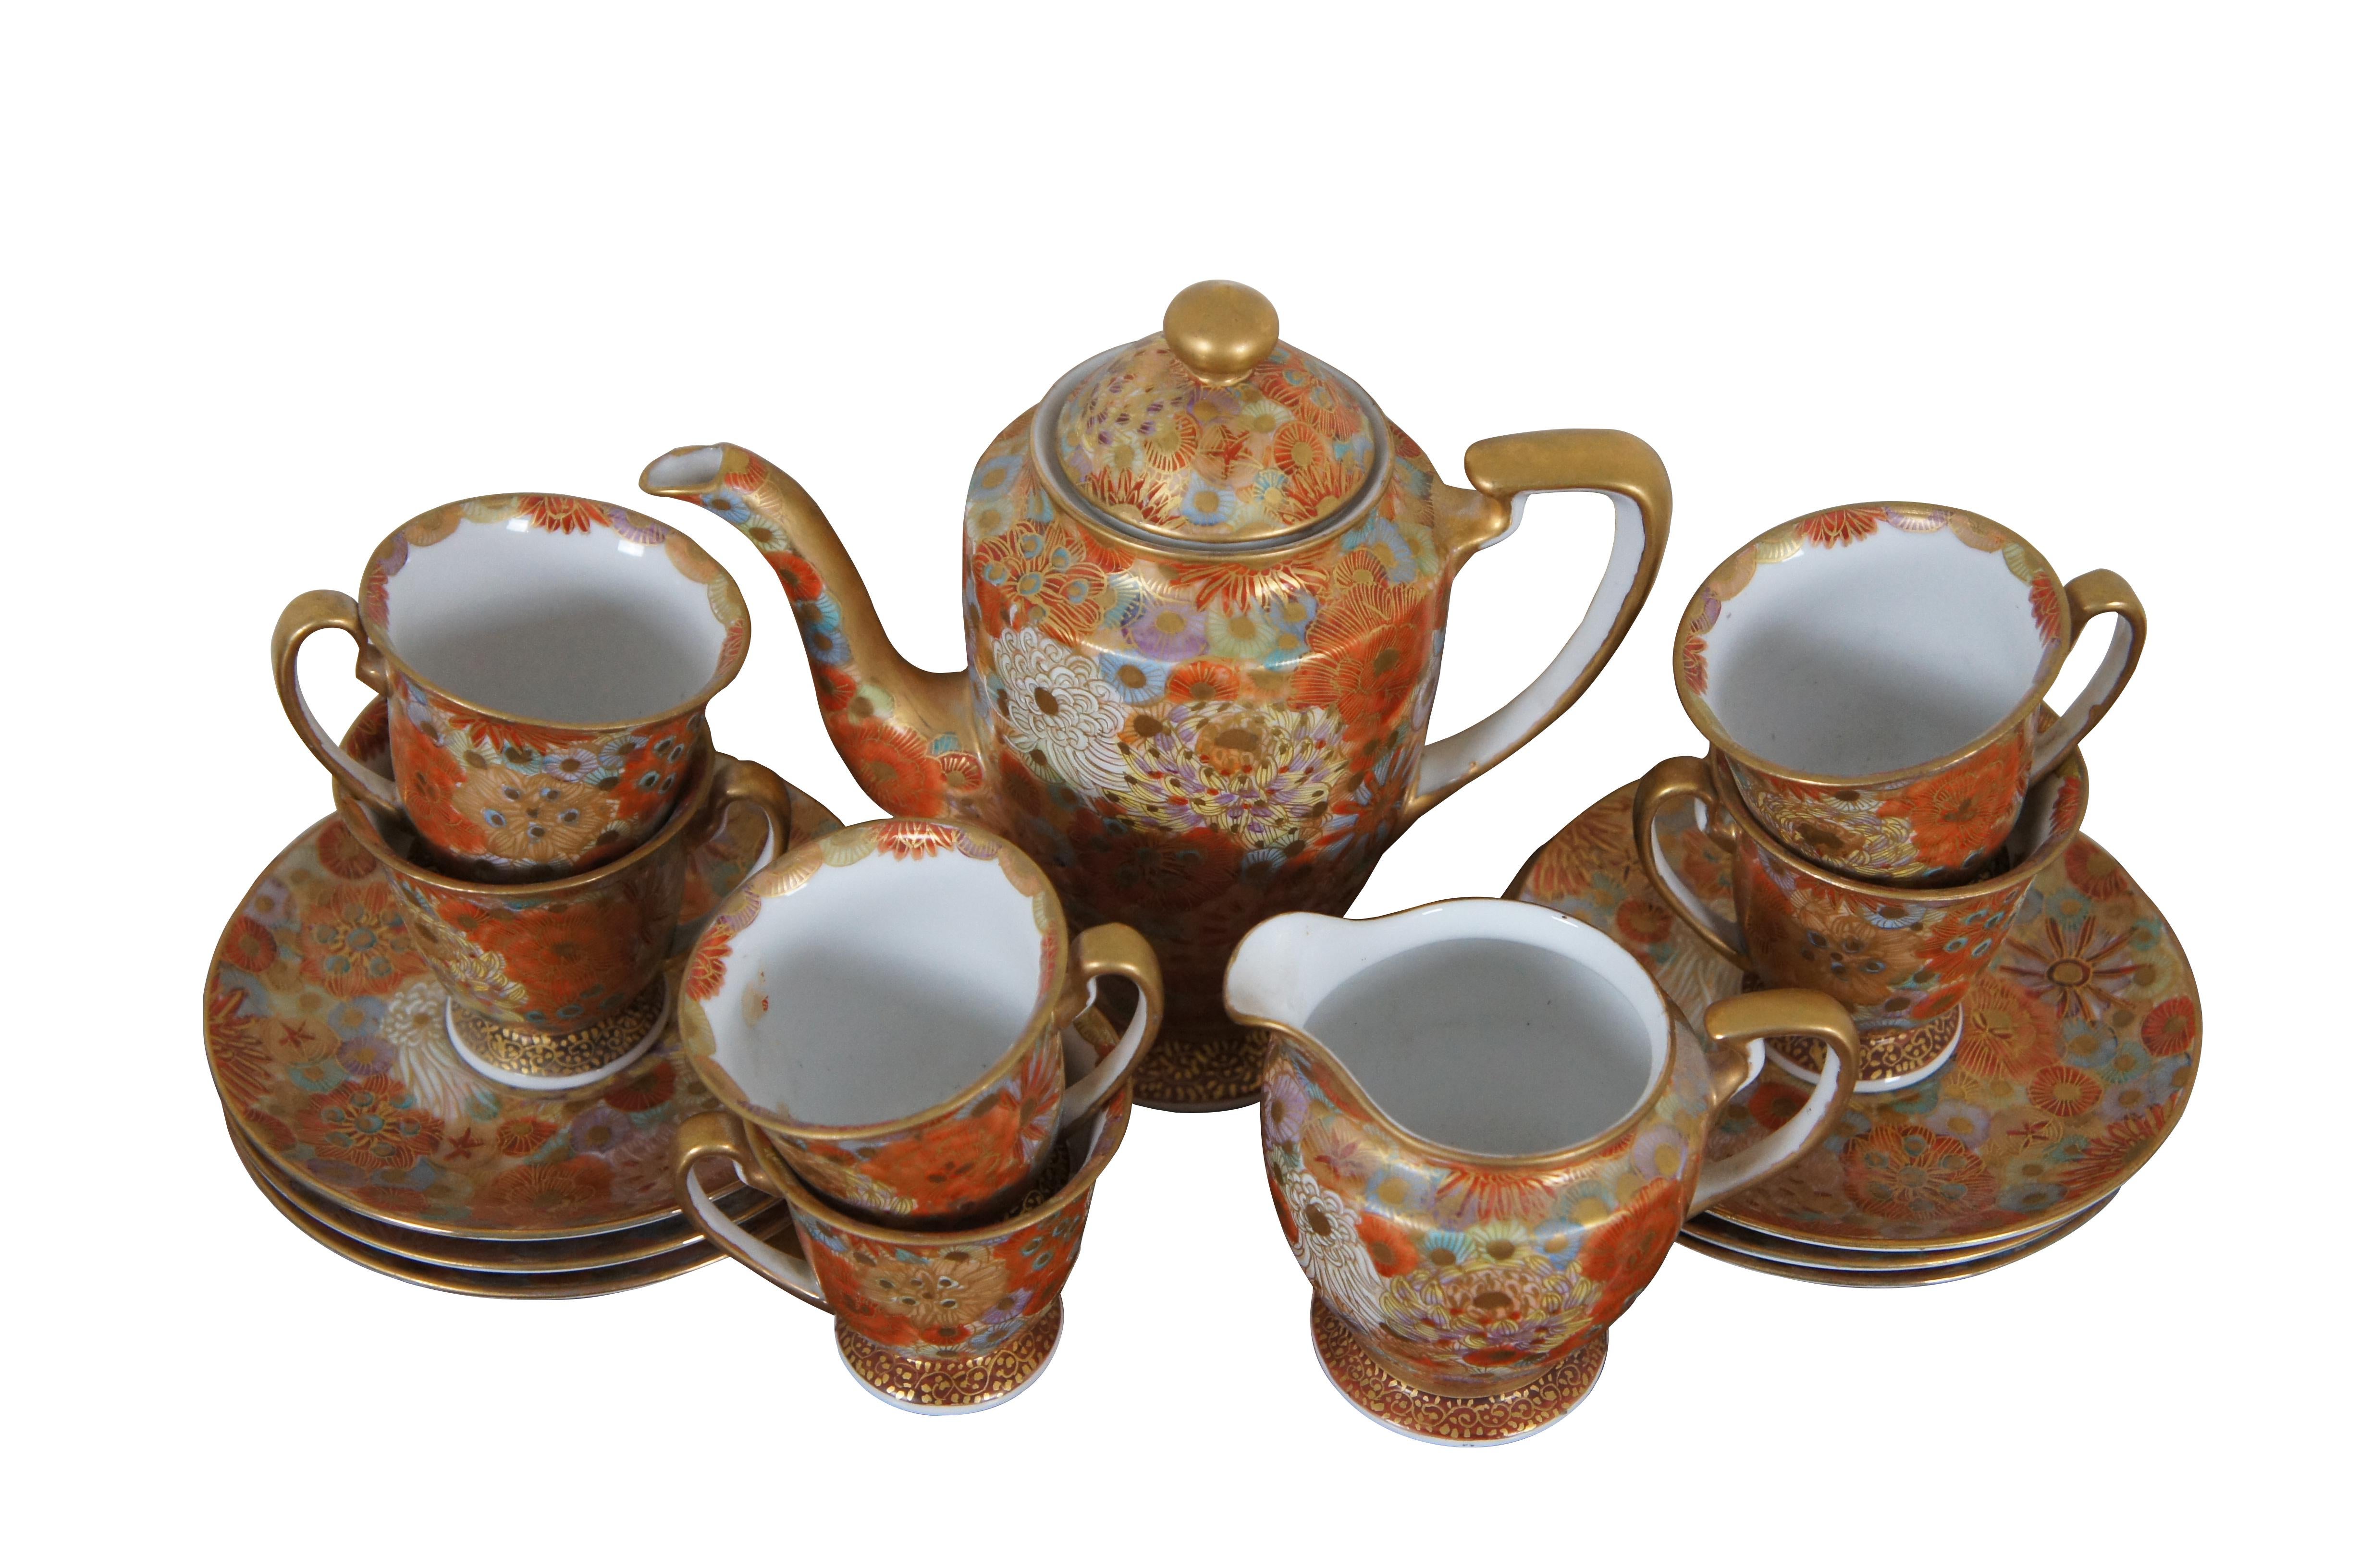 Vintage Japanese Satsuma porcelain demitasse tea or coffee set featuring the thousand flower design with gold accents.  Includes tea pot with lid, creamer, six cups and six saucers.  Made in Japan.

Dimensions:
Teapot - 6.5